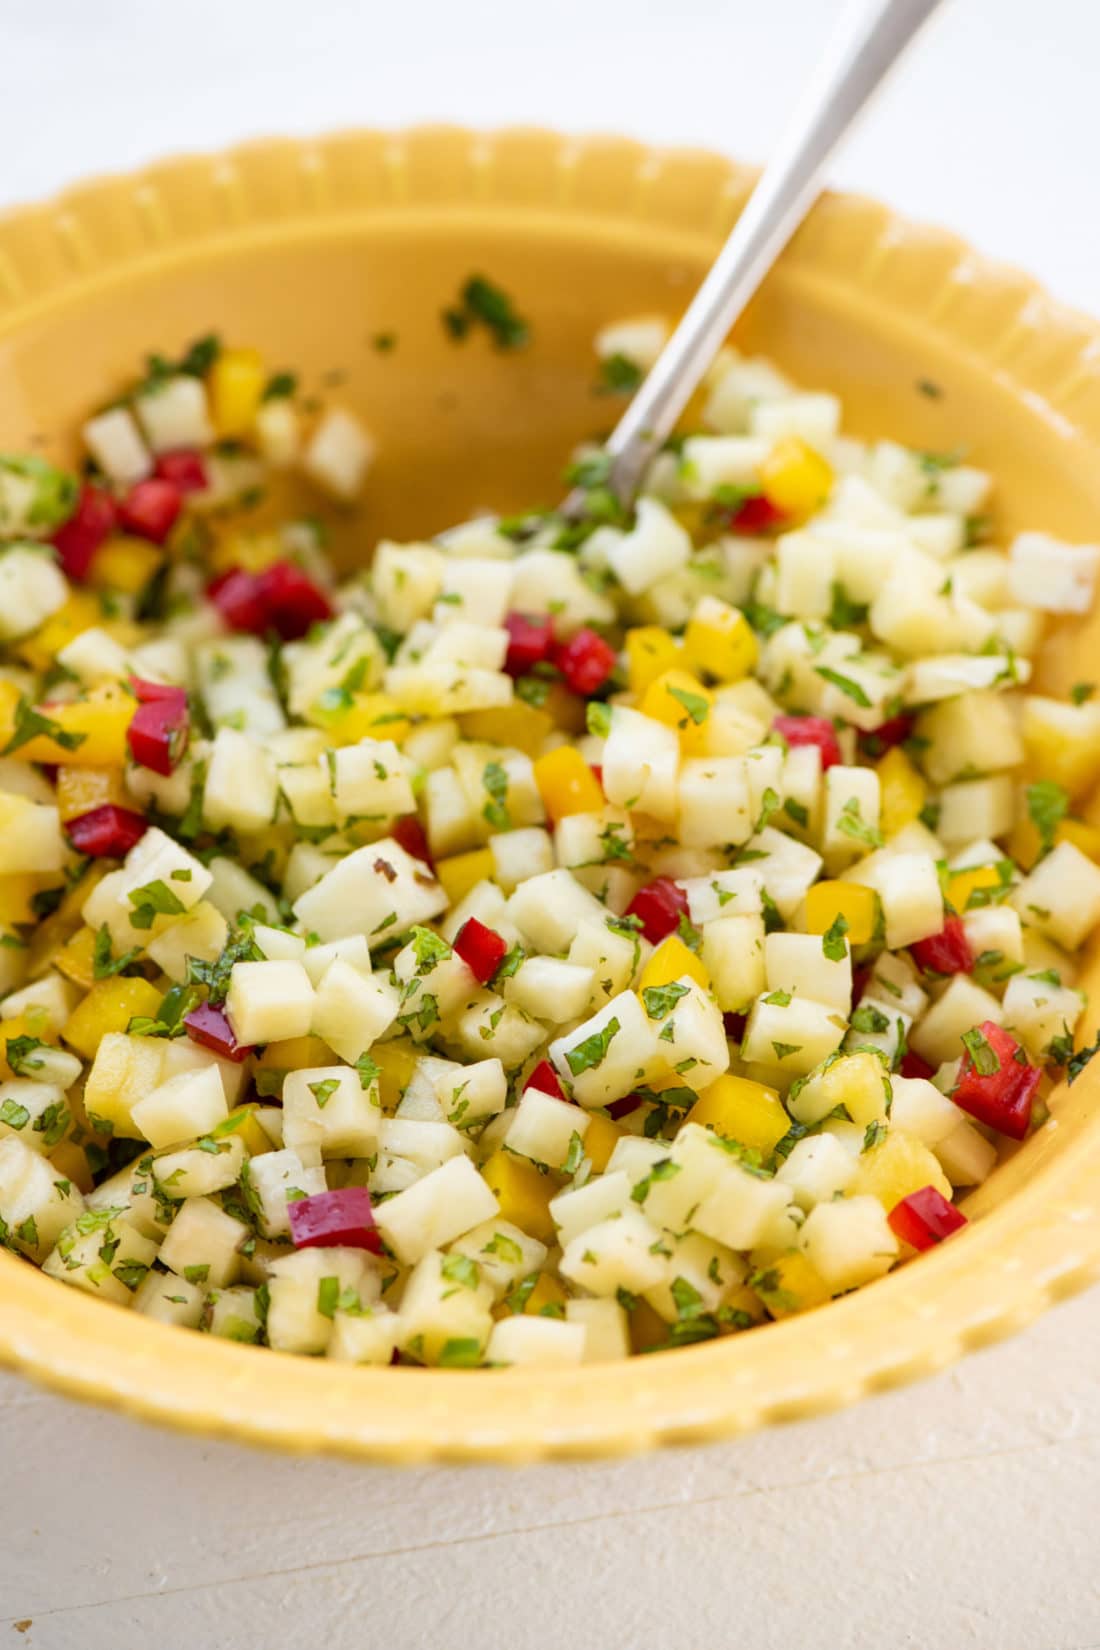 Spoon in a yellow bowl of Pineapple Mint Jalapeno Salsa.